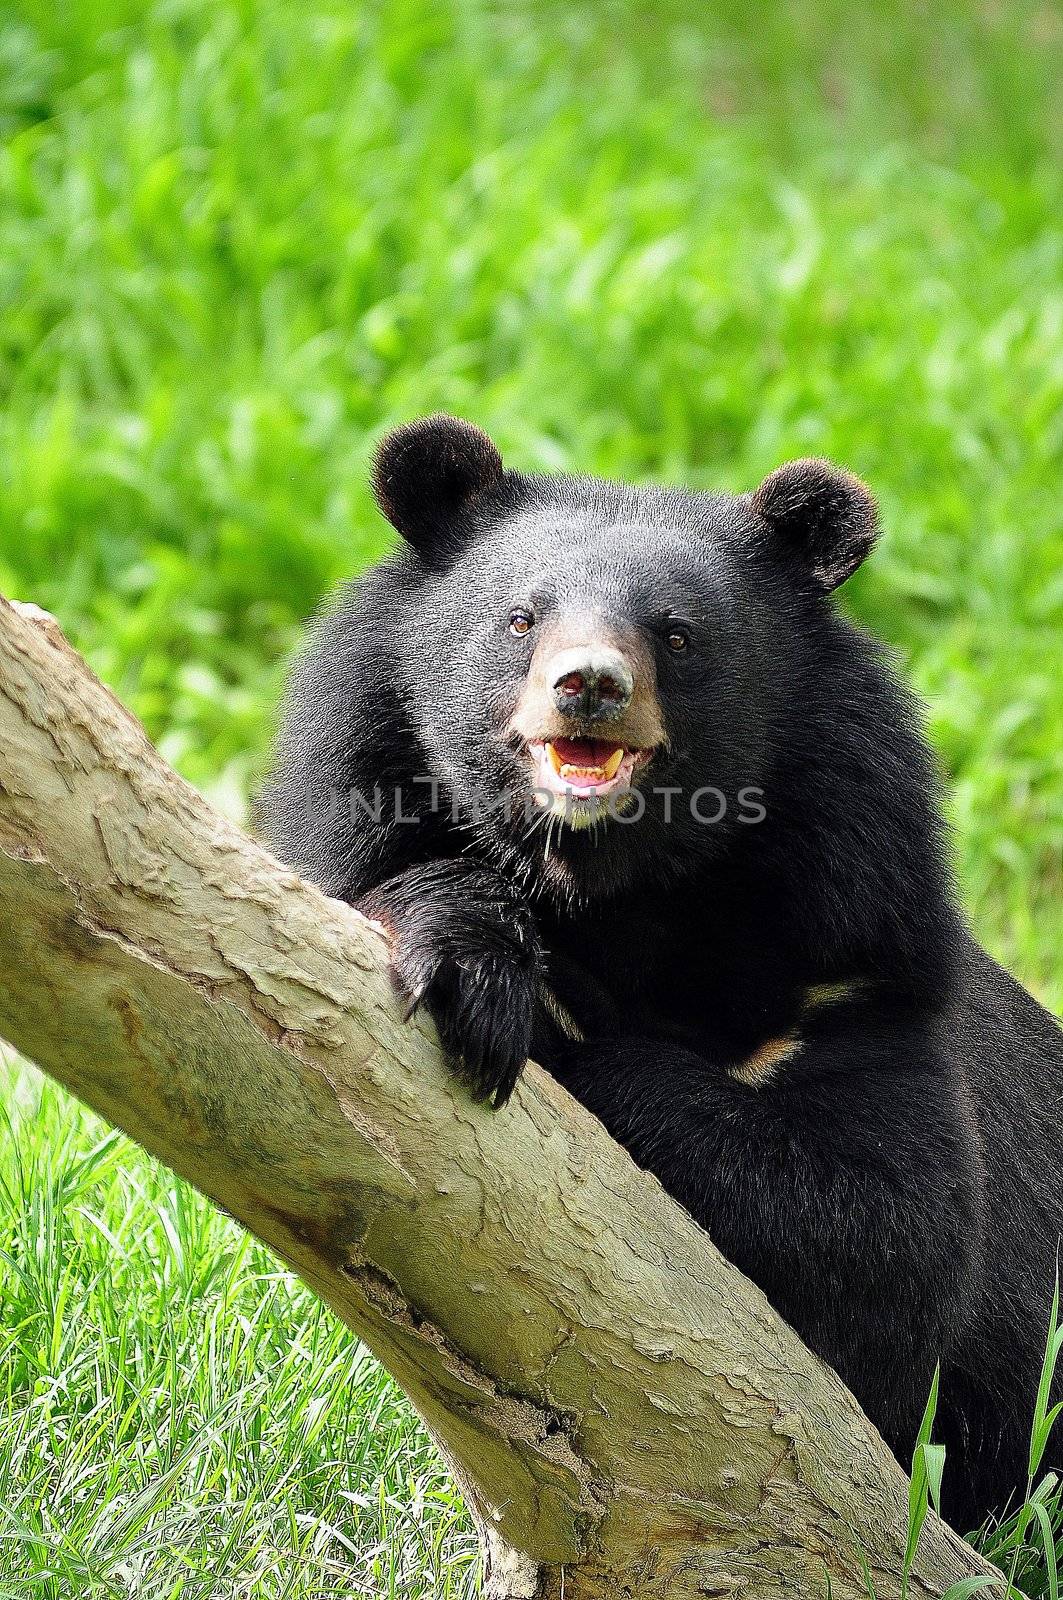 Asian black bears are close relatives to American black bears